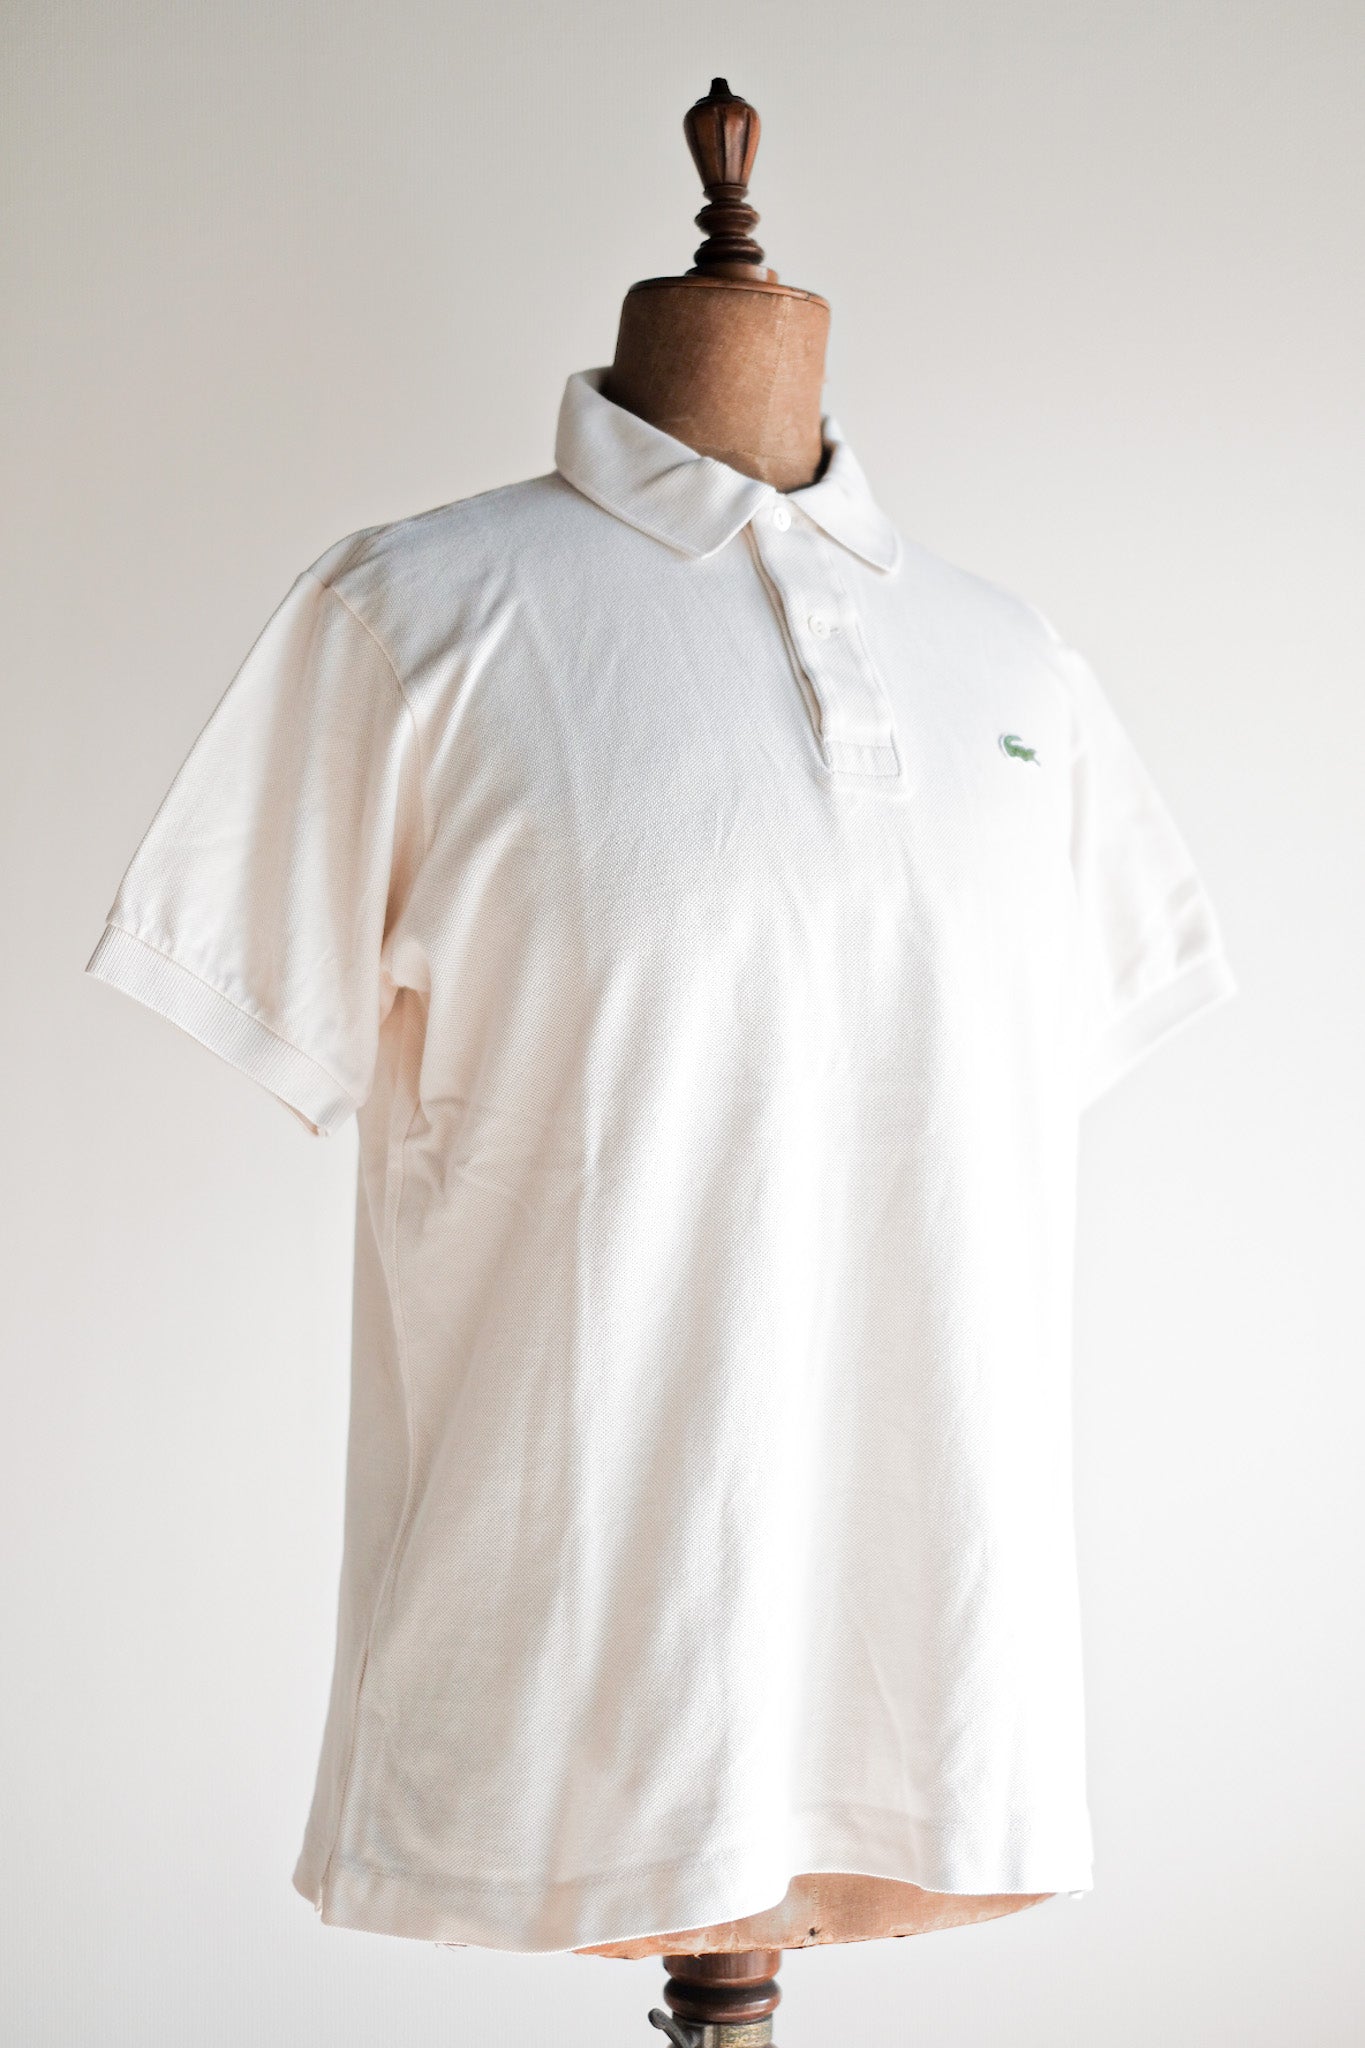 [~ 80's] CHEMISE LACOSTE S/S POLO SHIRT SIRT SIZE.4 "ECRU"